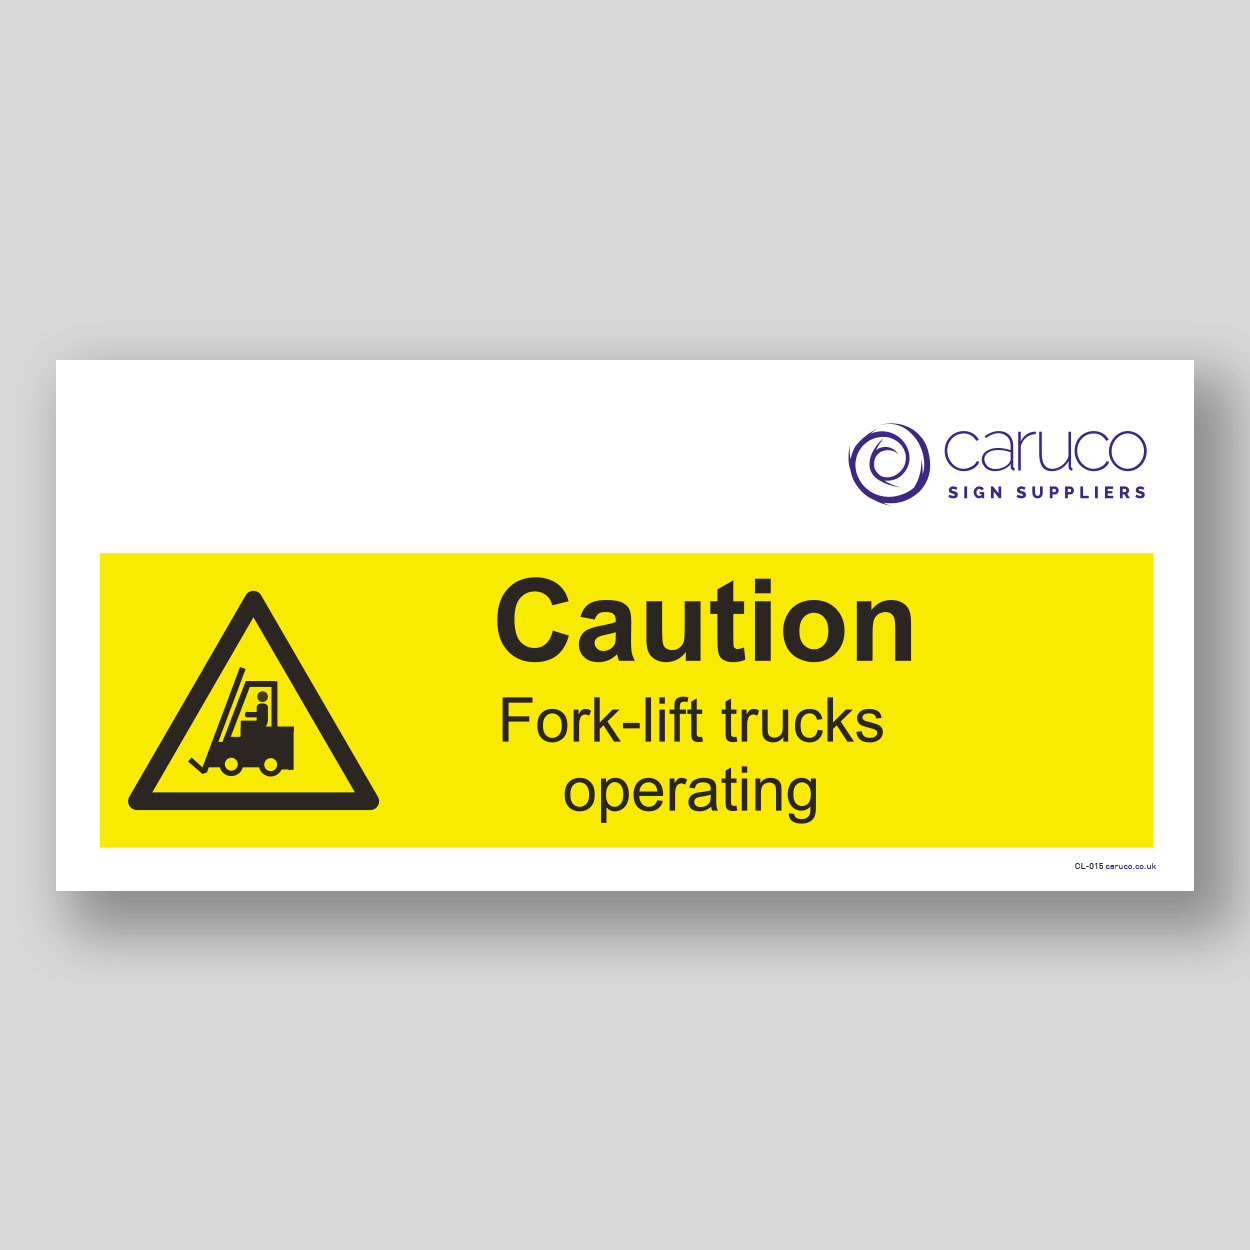 CL-015 Caution - fork lifts operating